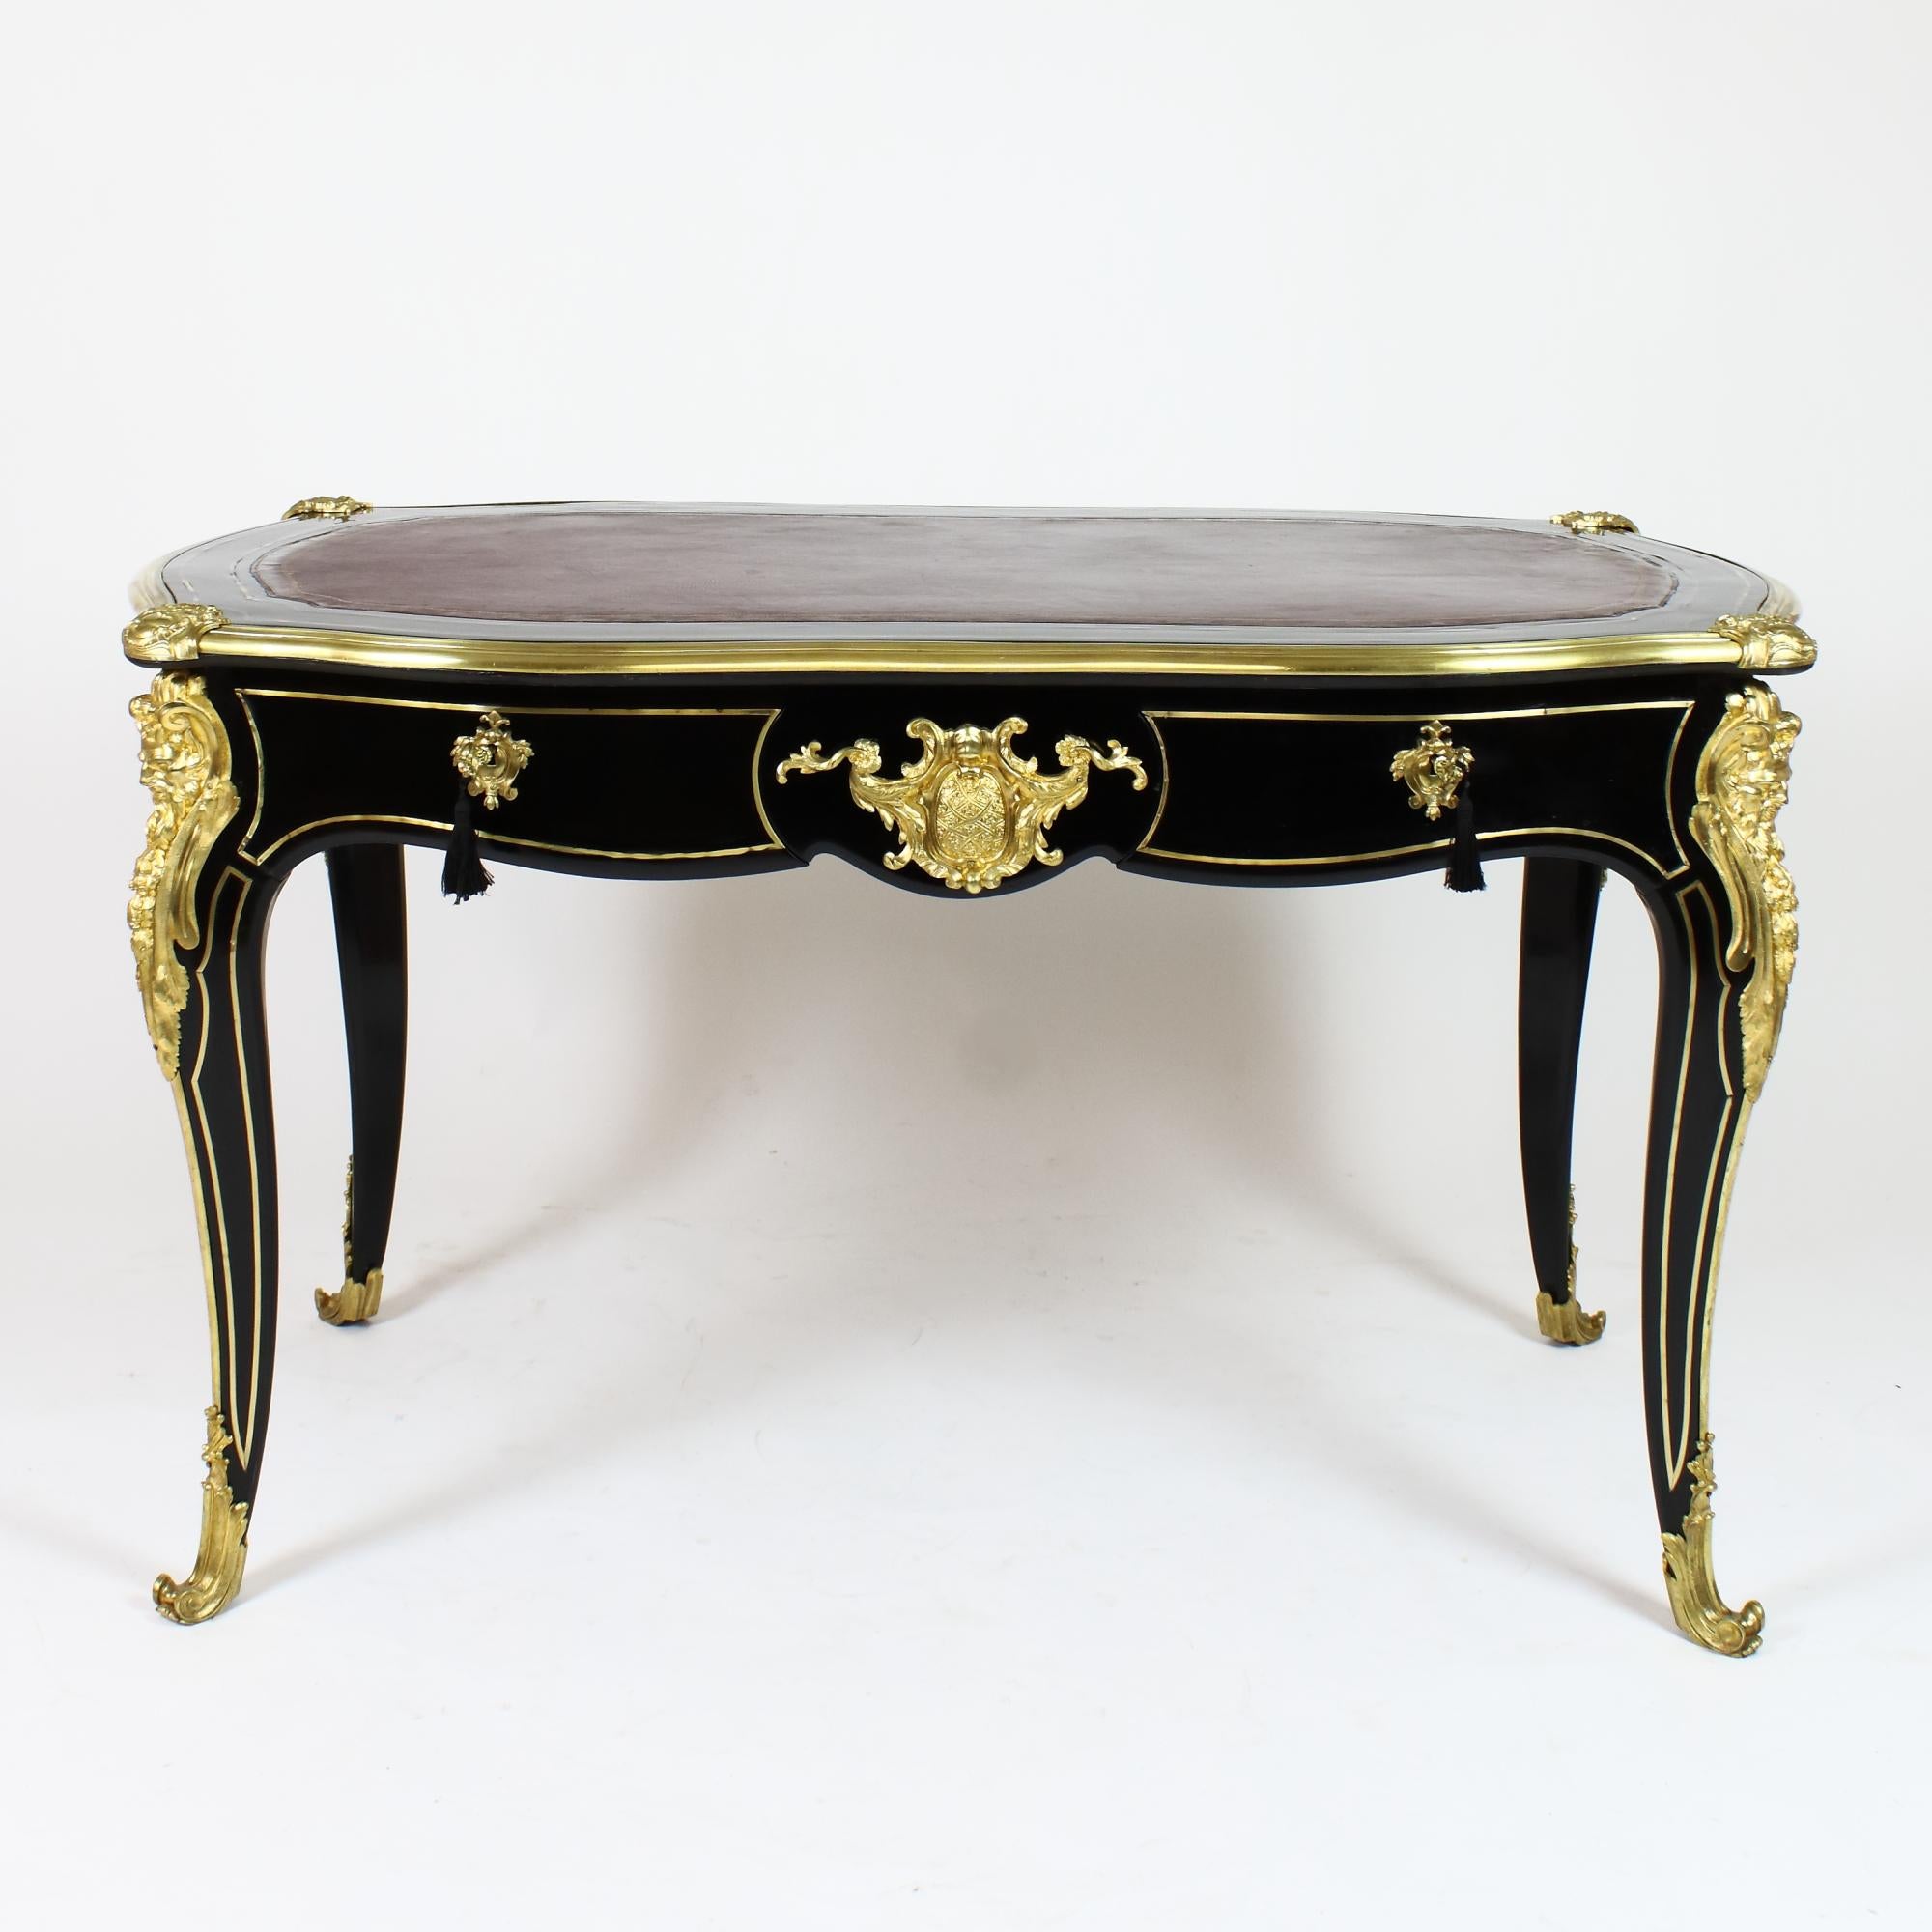 Excellent and rare French 19th century Napoleon III ebonized black lacquer Bureau plat or writing desk made in the Régence/Louis XV style made by Benjamin Gros/Paris, ca. 1855.
Raised on cabriole legs with rich gilt bronze mounting in the shape of